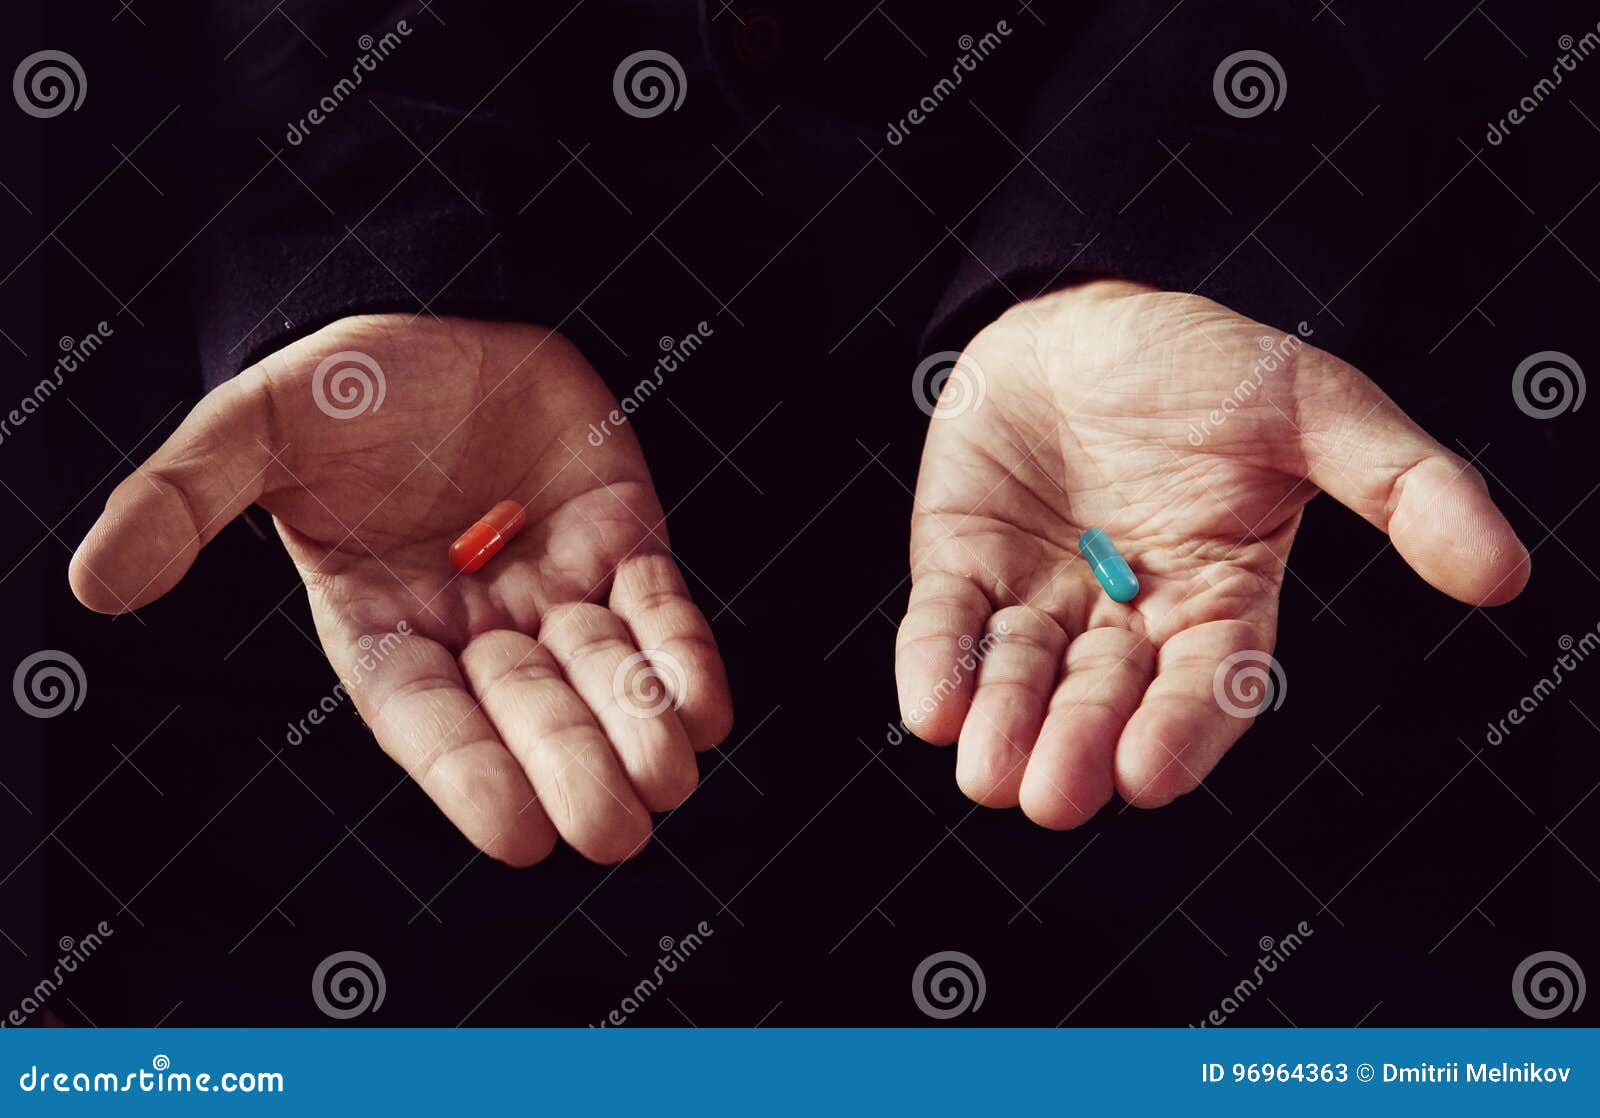 Red Pill Blue Pill Concept Stock Image Image Of Drug